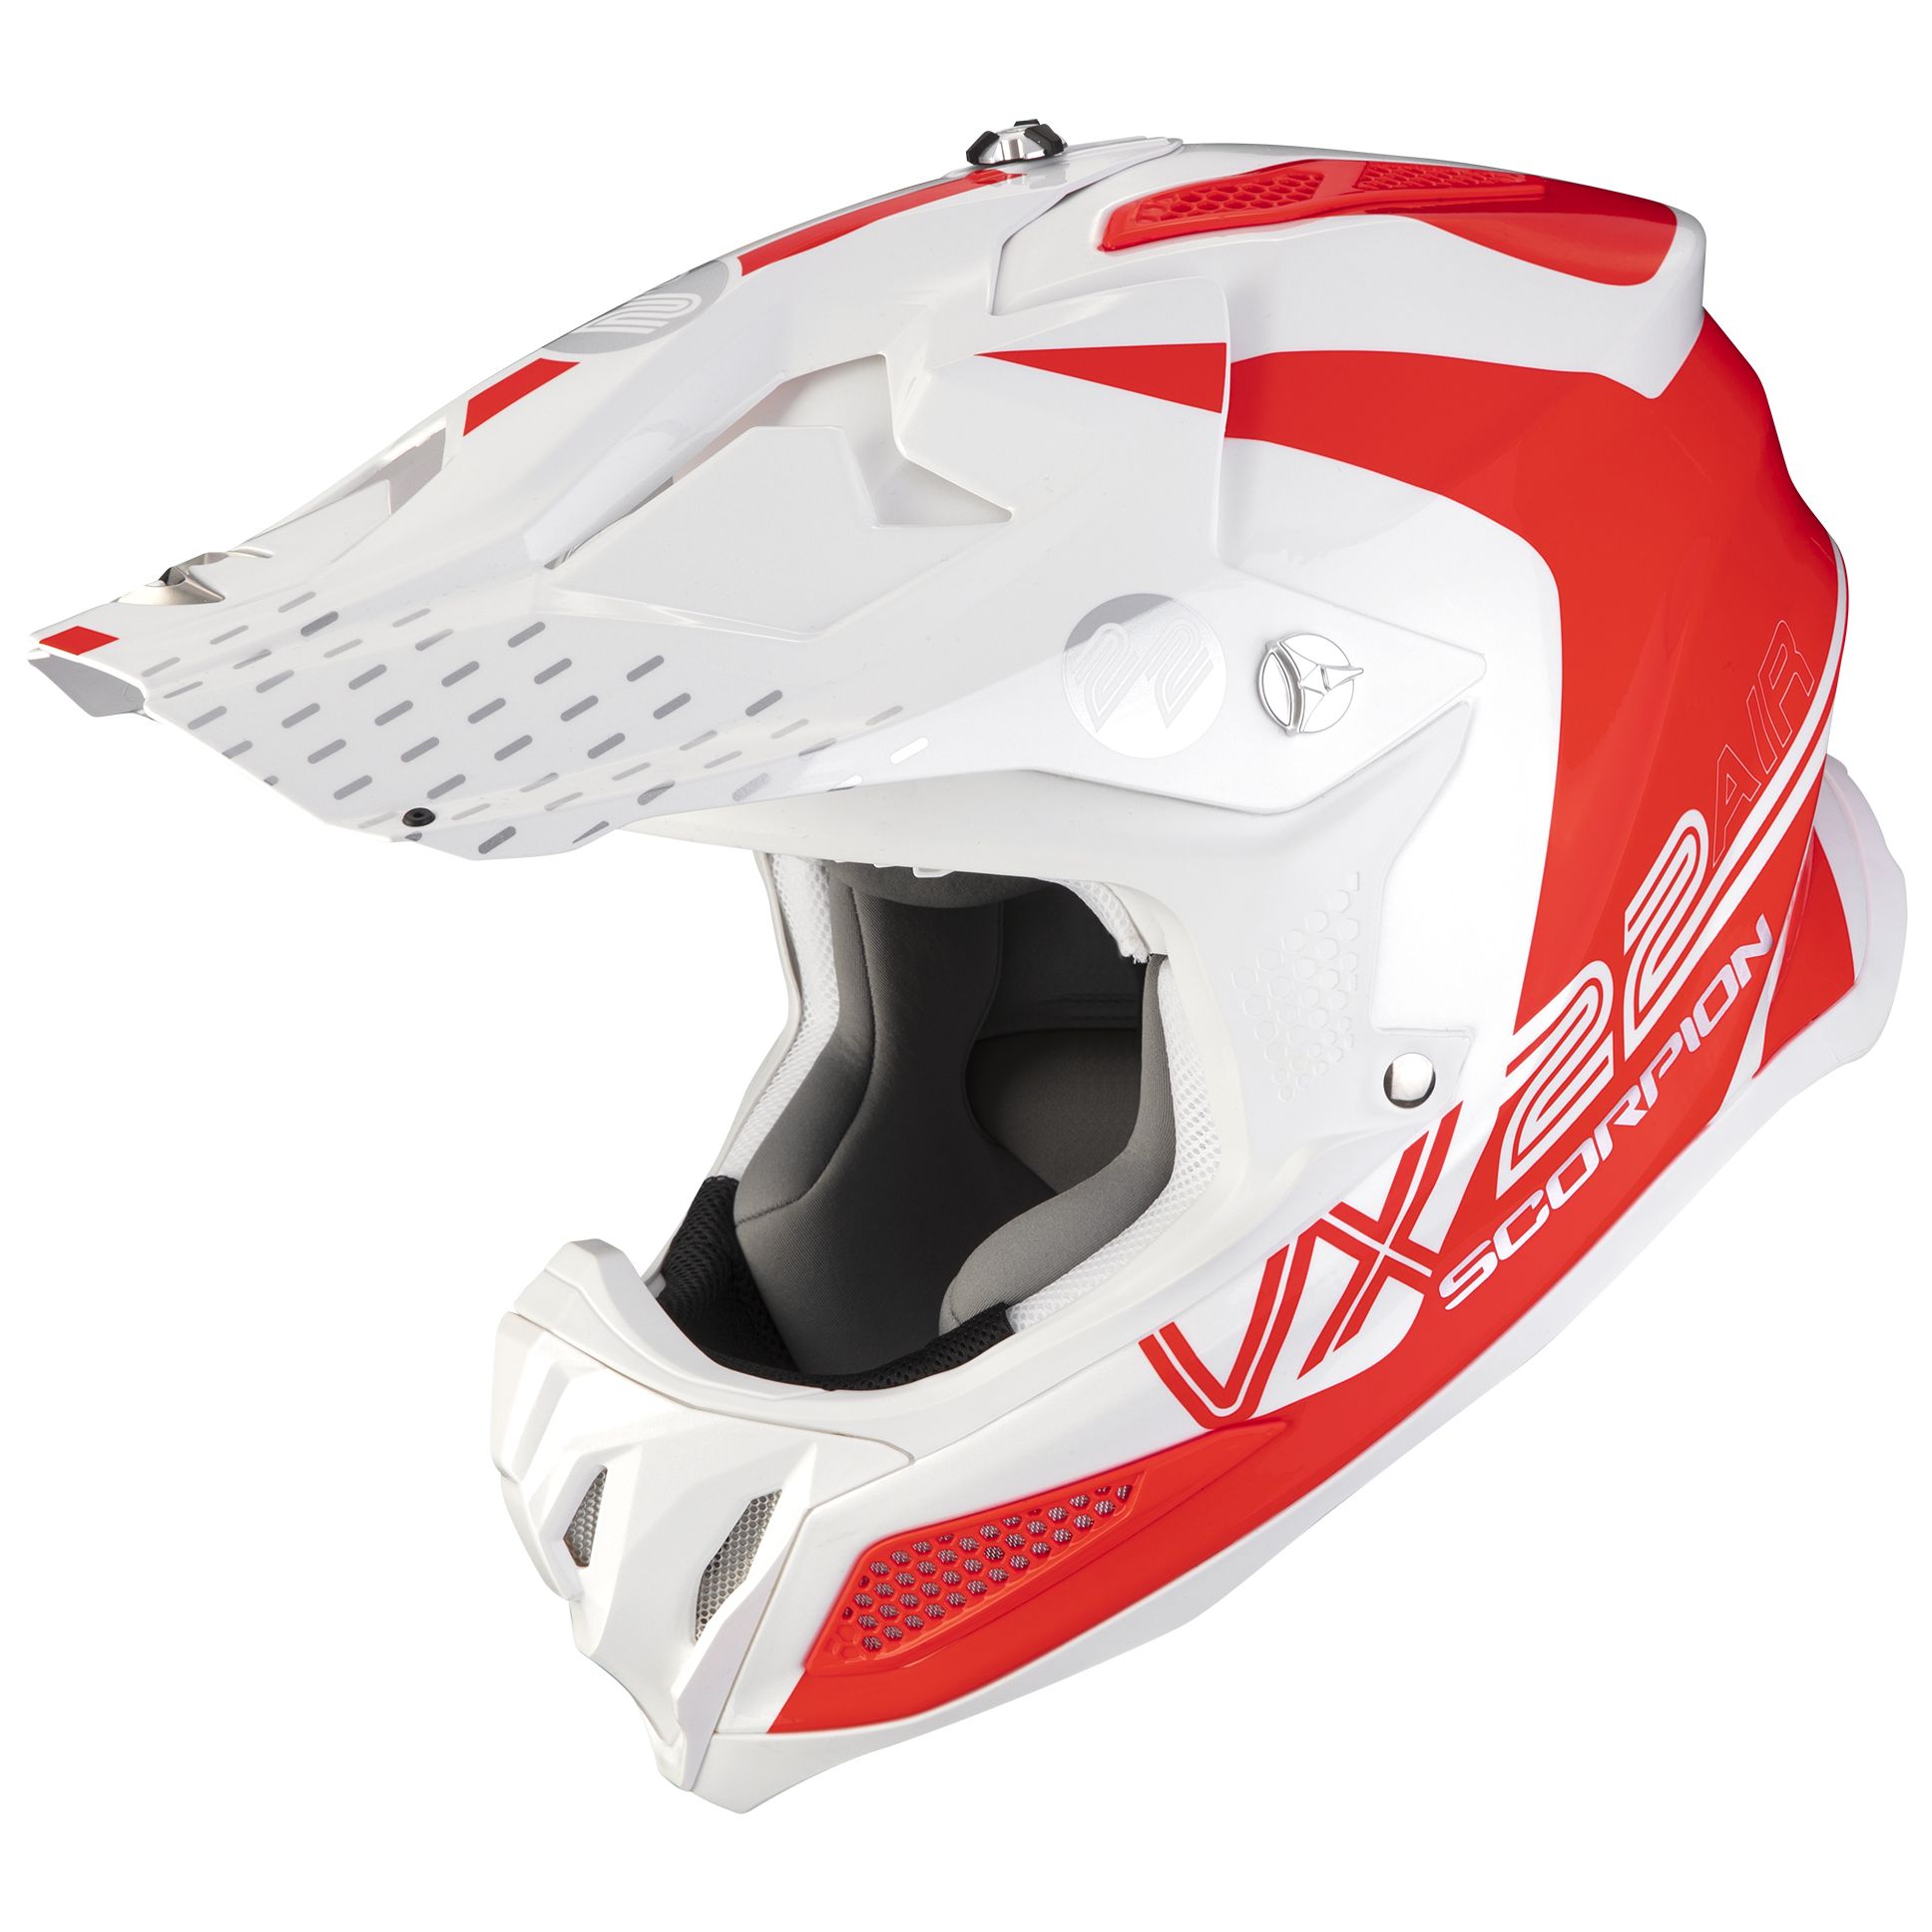 Image of Casque cross Scorpion Exo VX-22 AIR - ARES - BLANC ROUGE FLUO 2023